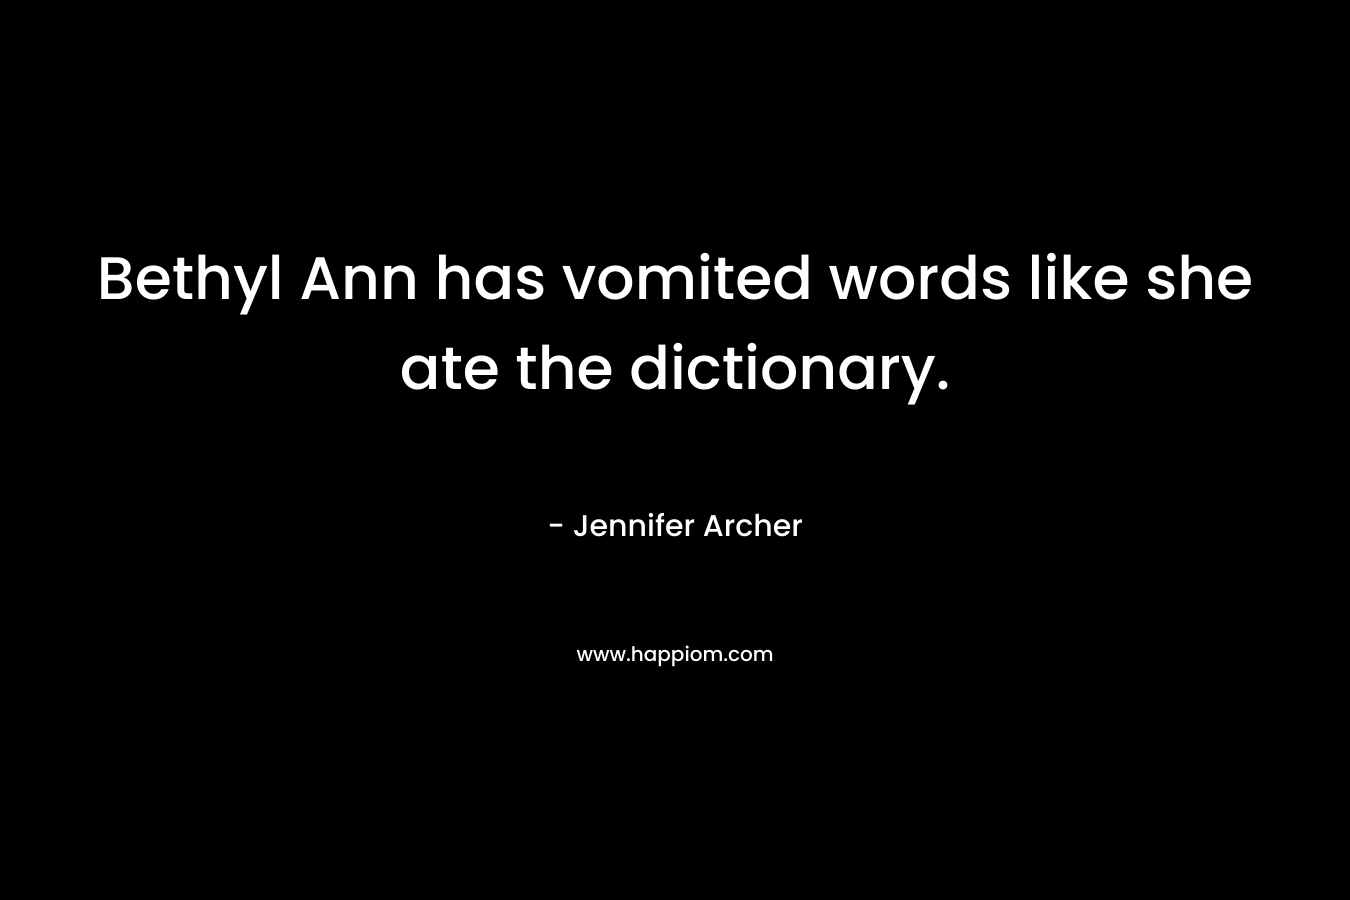 Bethyl Ann has vomited words like she ate the dictionary.